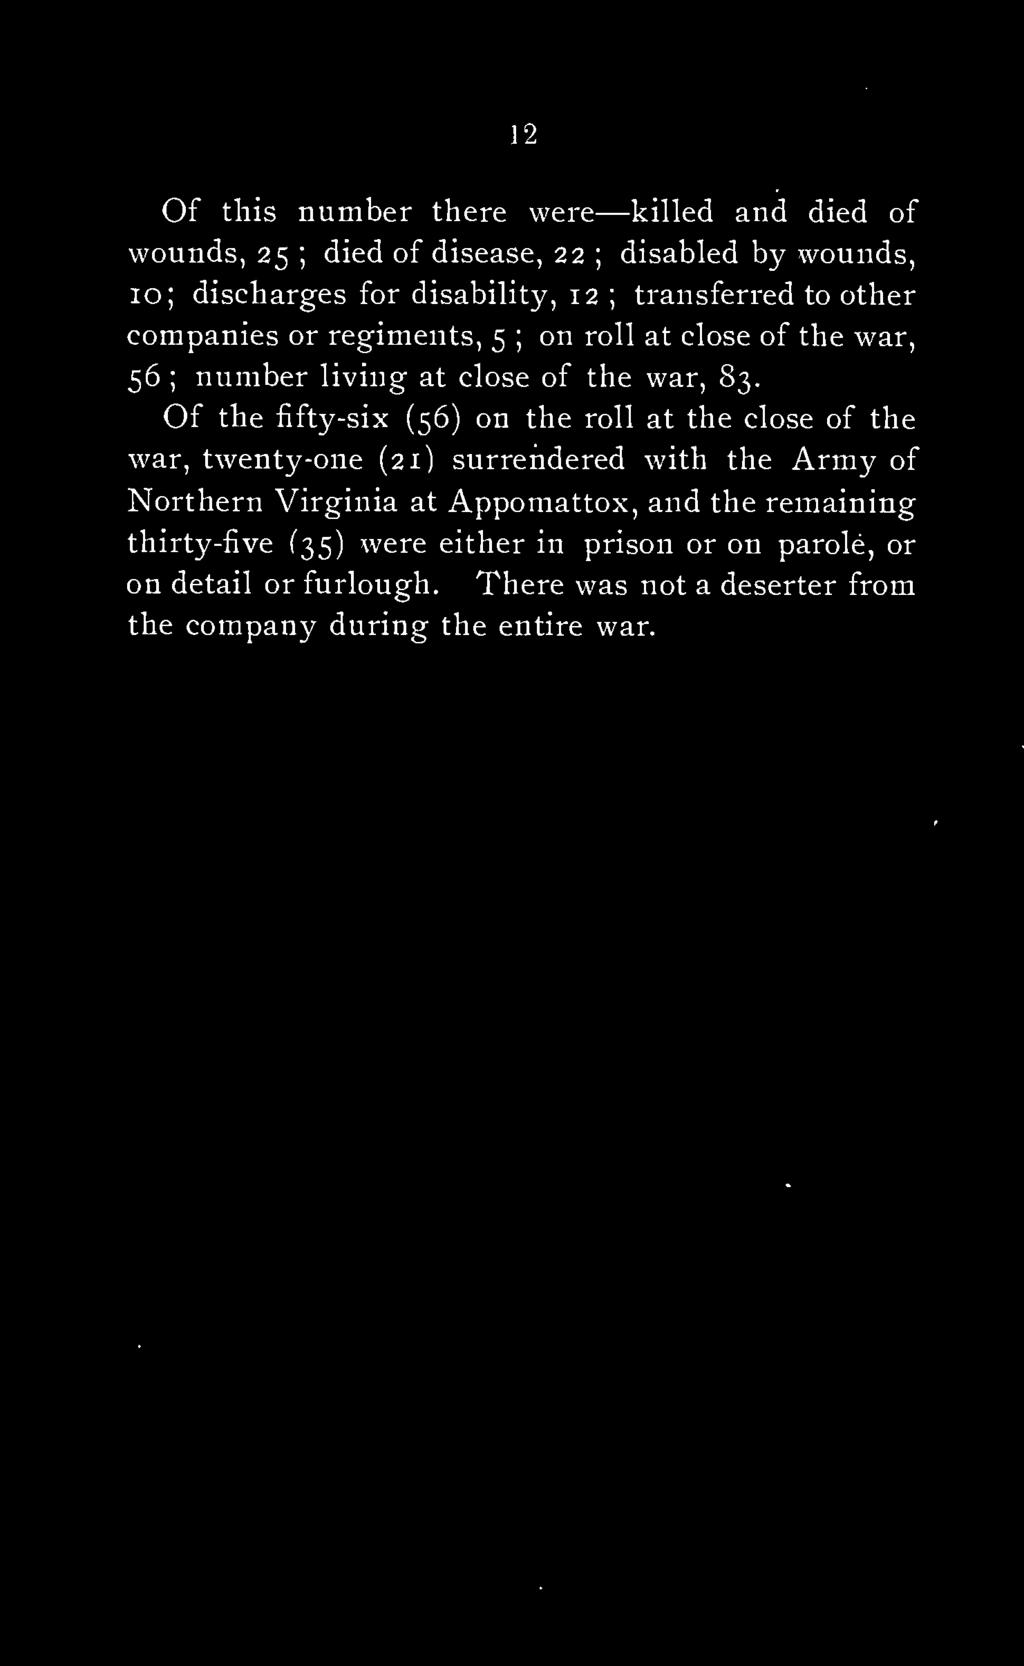 the Army of Northern Virginia at Appomattox, and the remaining thirty-five (35) were either